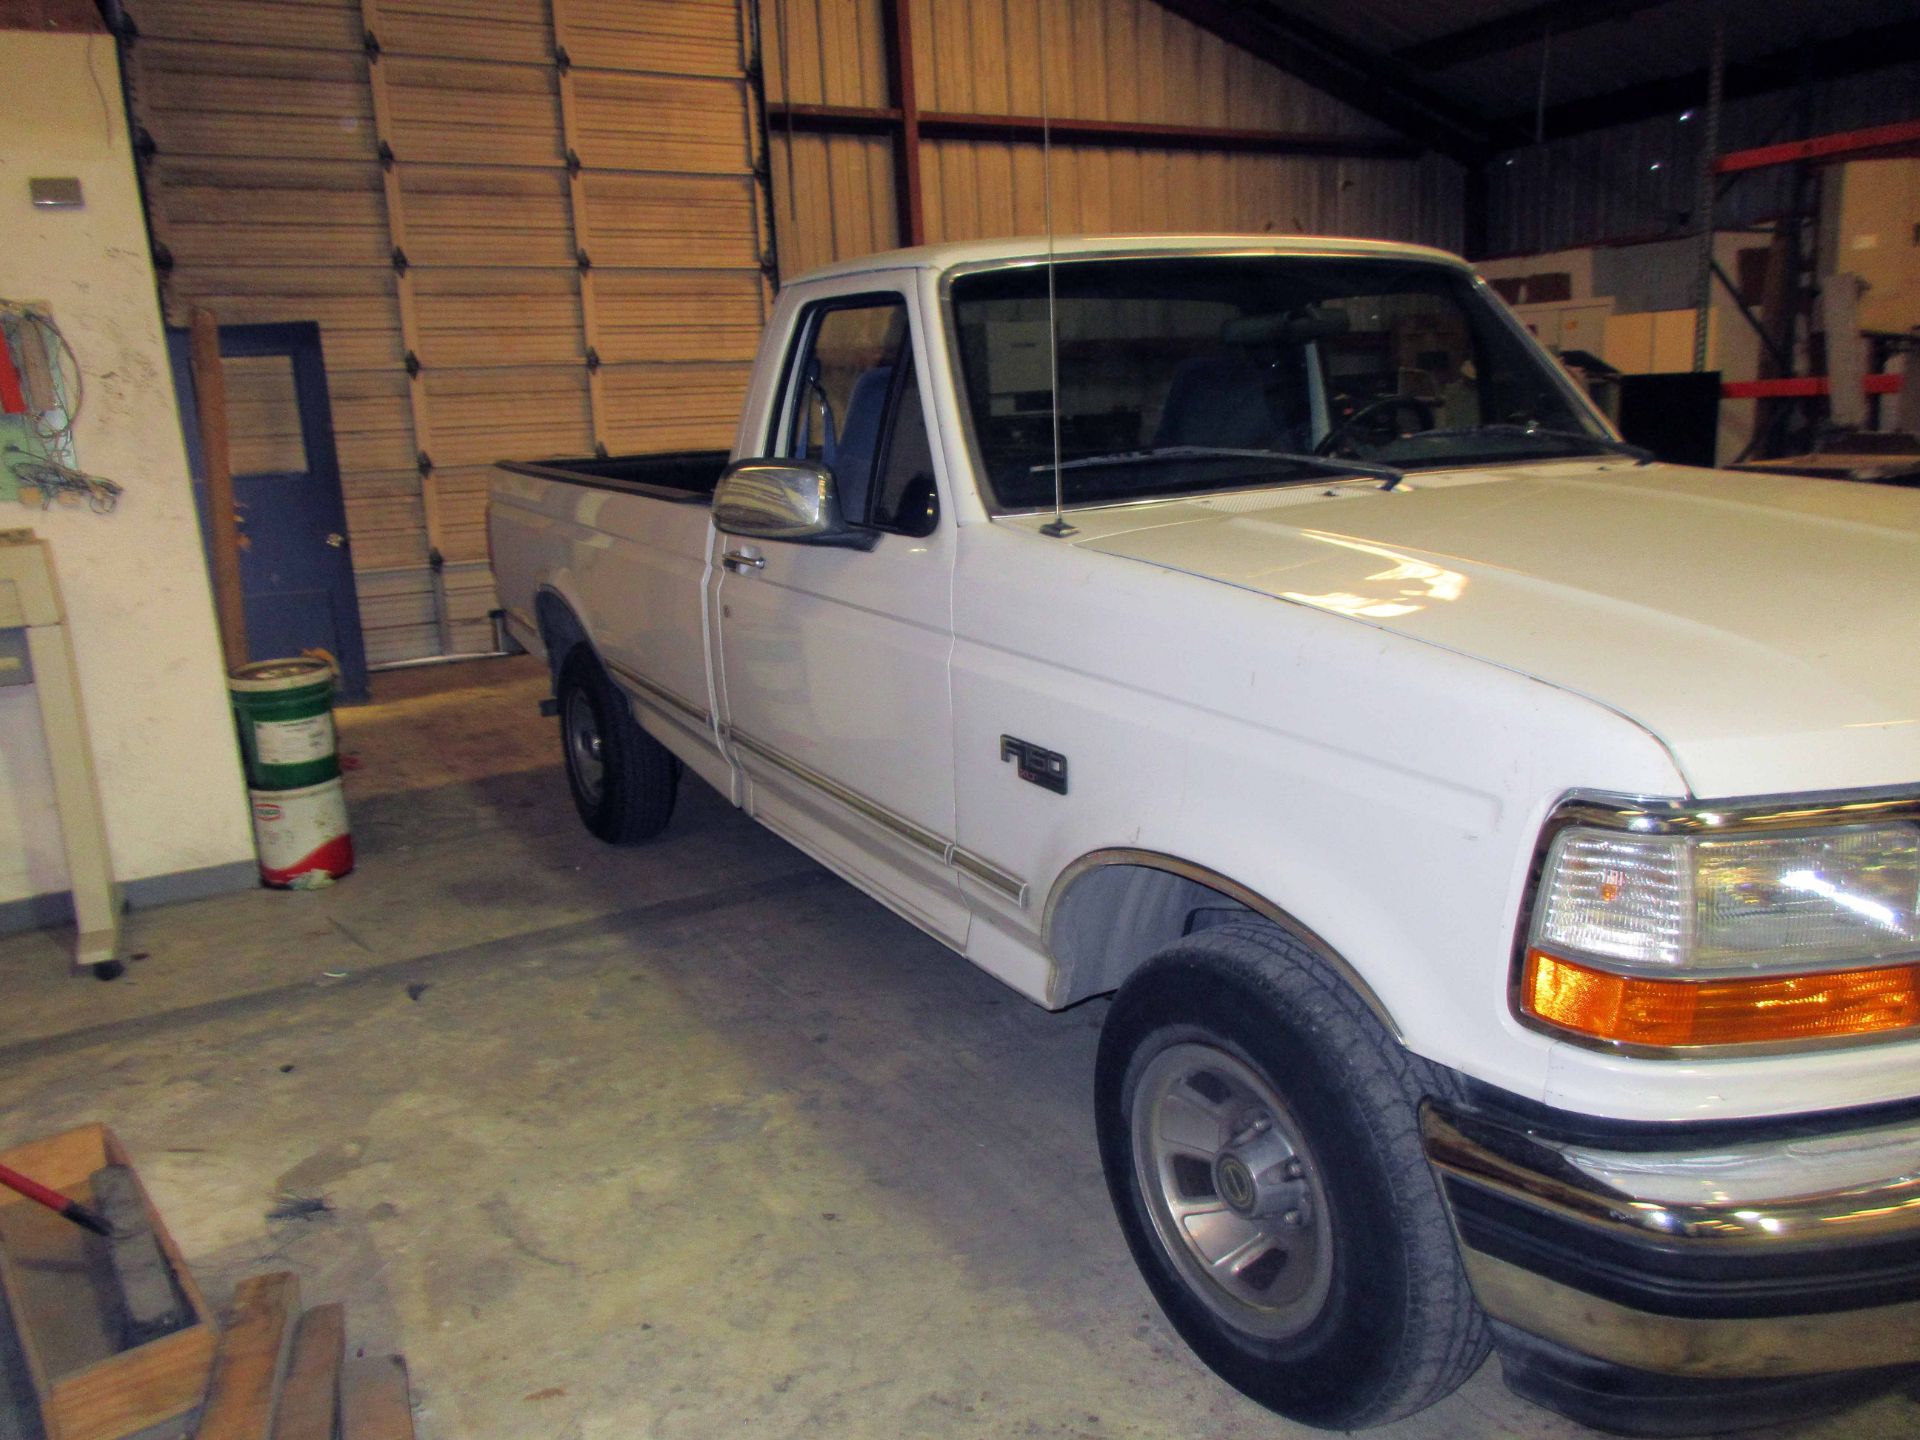 PICKUP TRUCK, 1996 FORD MDL. F150XLT, gasoline engine, auto. trans., Odo: 149,000 miles, Texas - Image 4 of 6